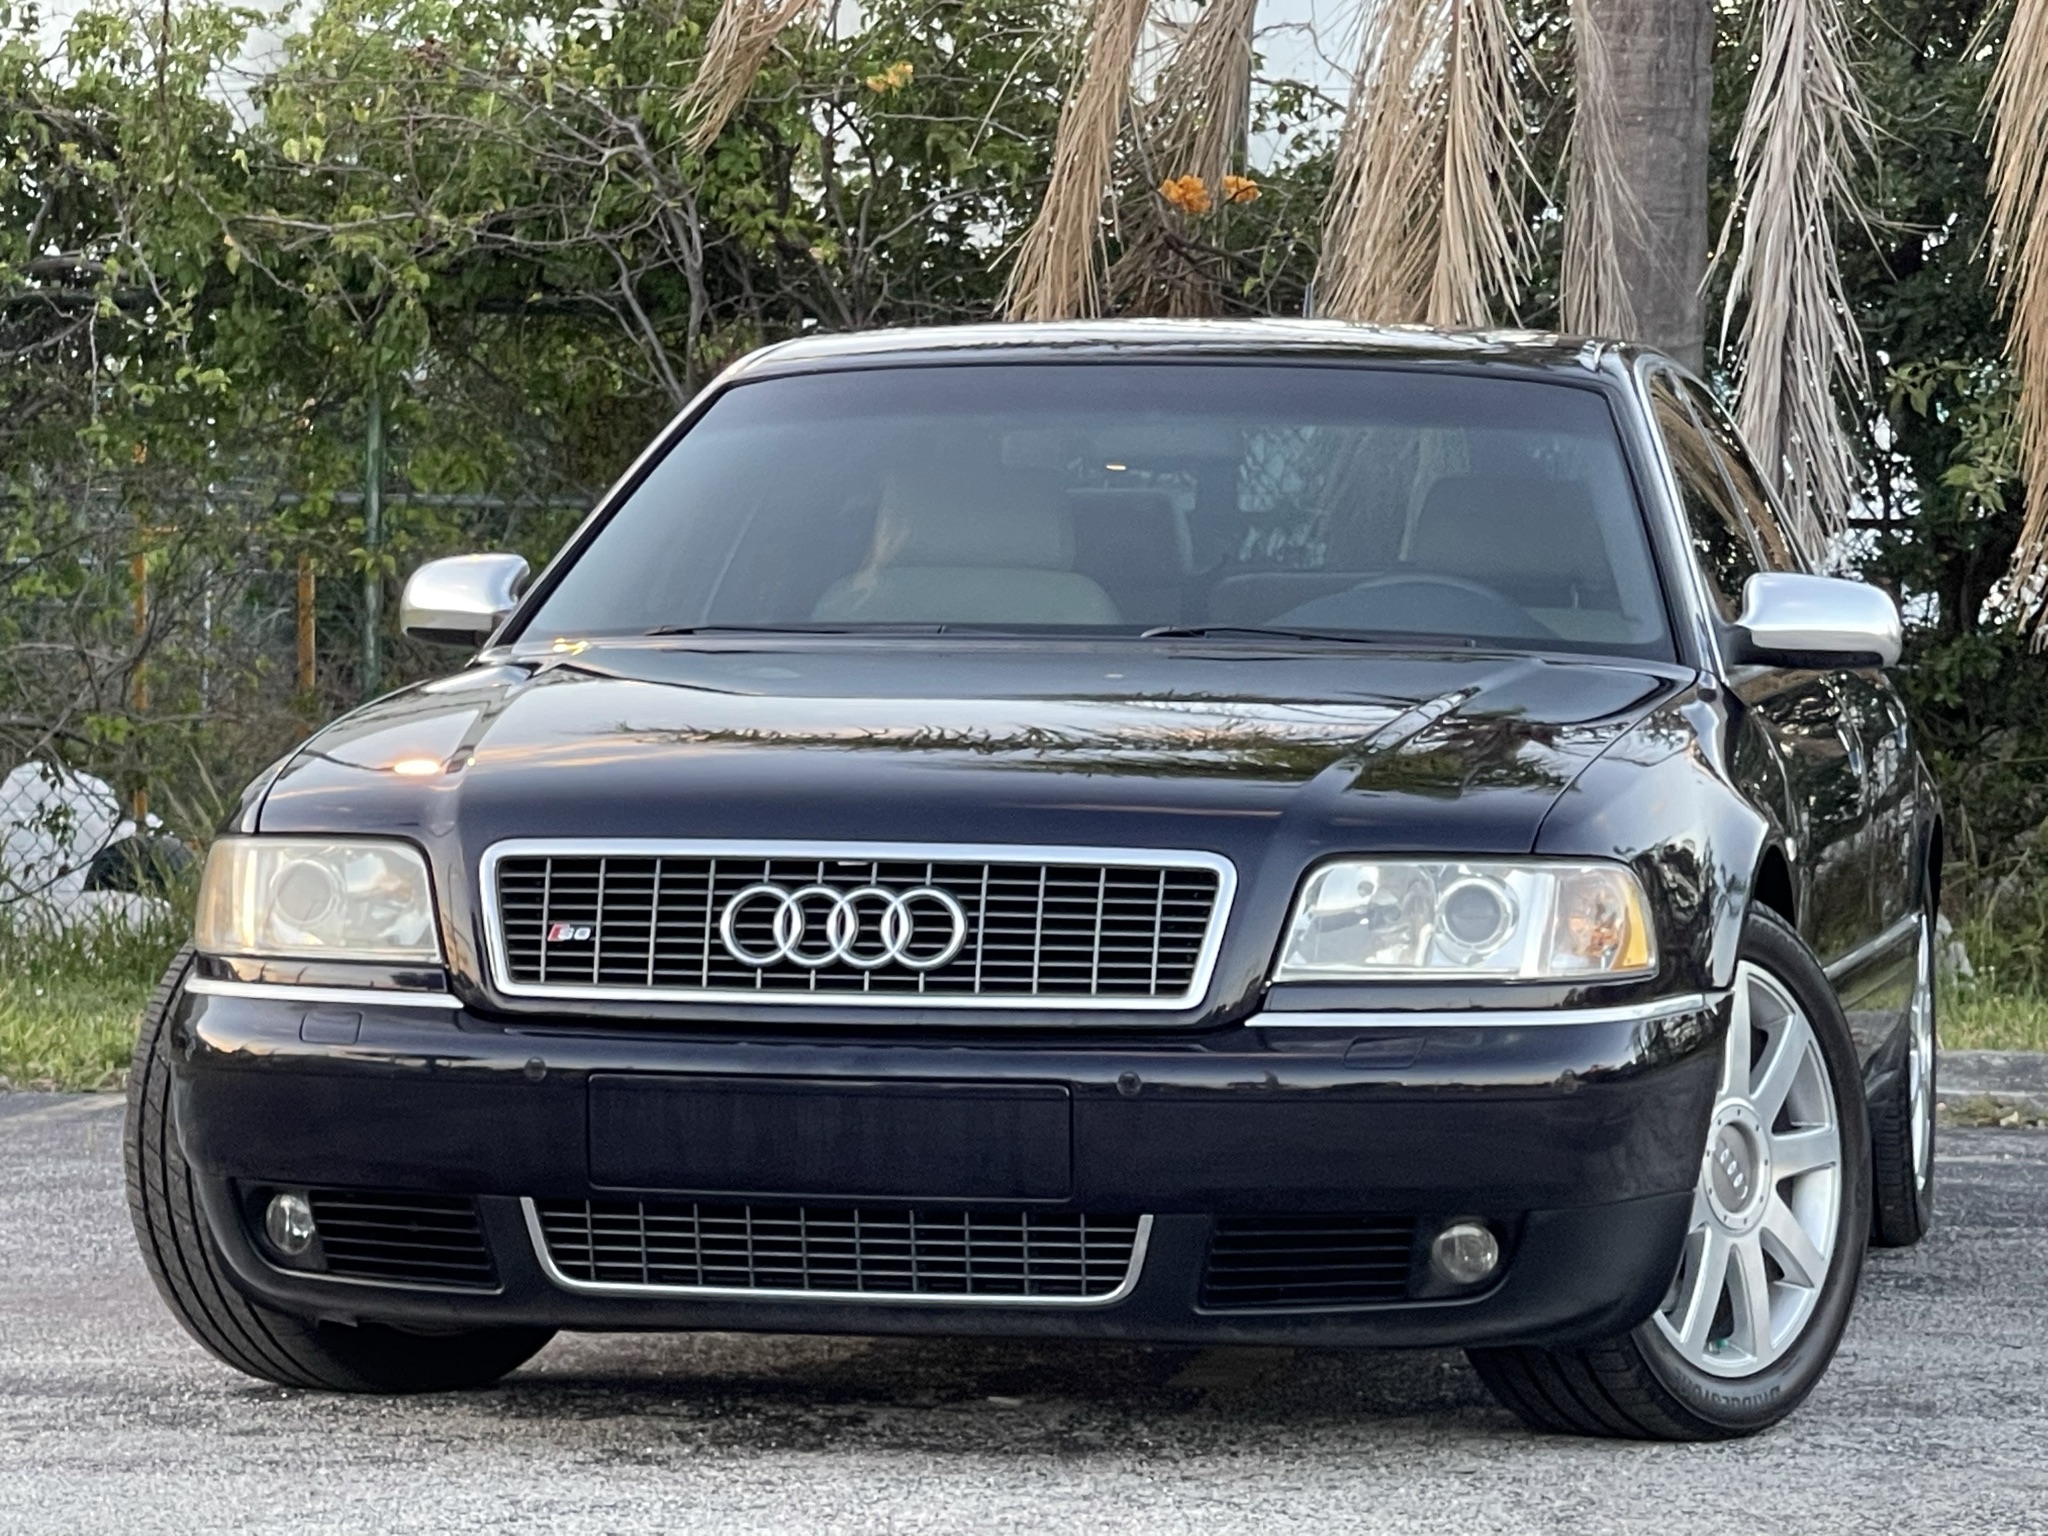 Buy Used 2003 AUDI S8 QUATTRO for $14 900 from trusted dealer in Brooklyn,  NY!